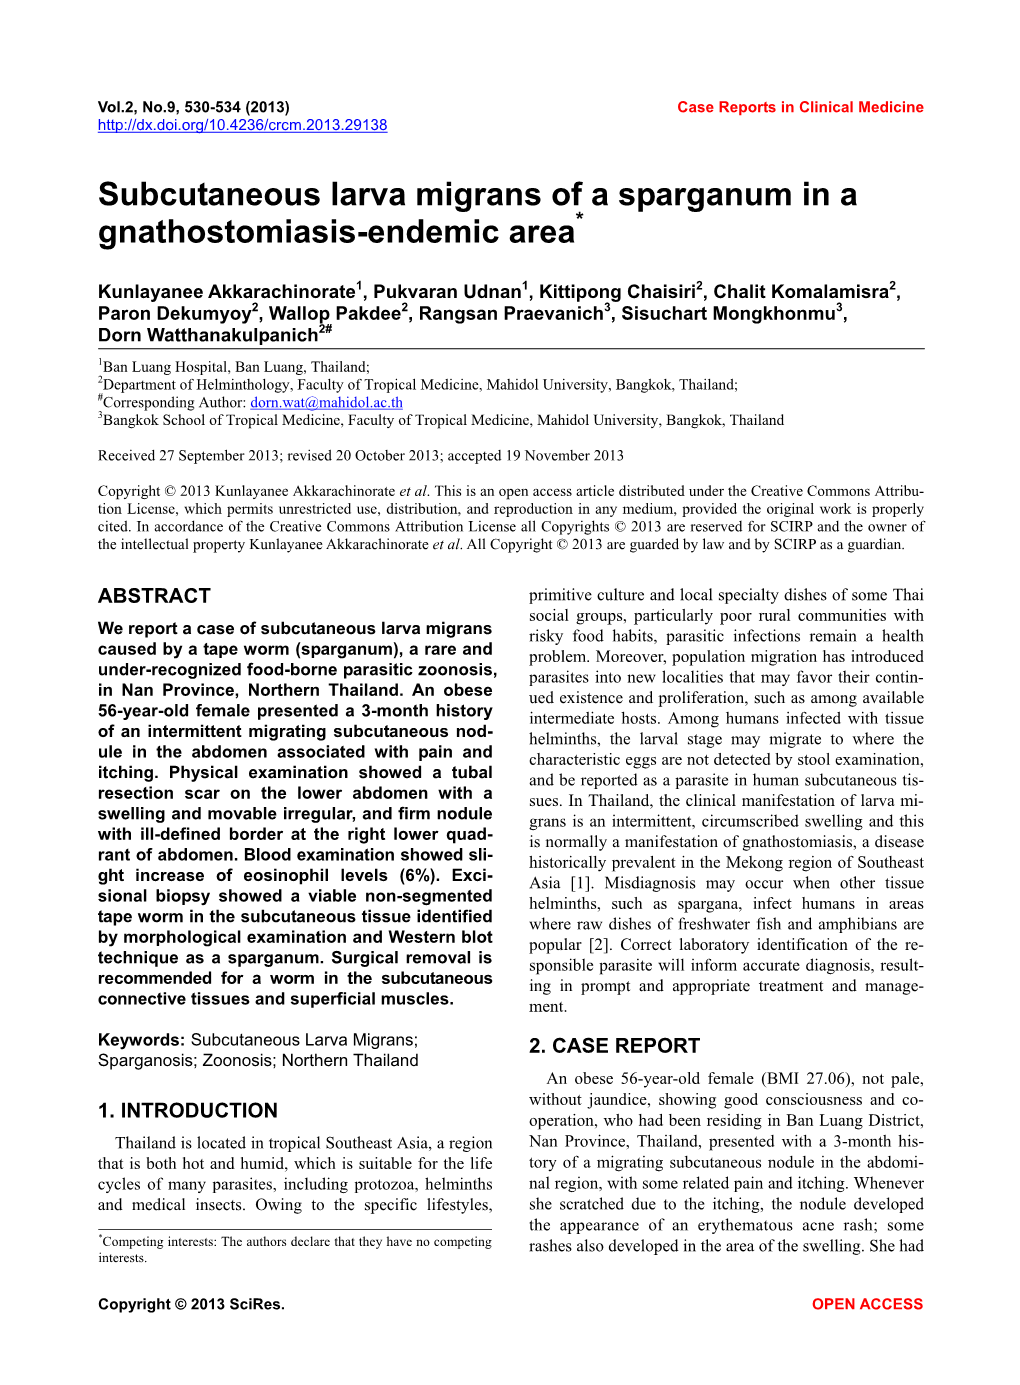 Subcutaneous Larva Migrans of a Sparganum in a Gnathostomiasis-Endemic Area*